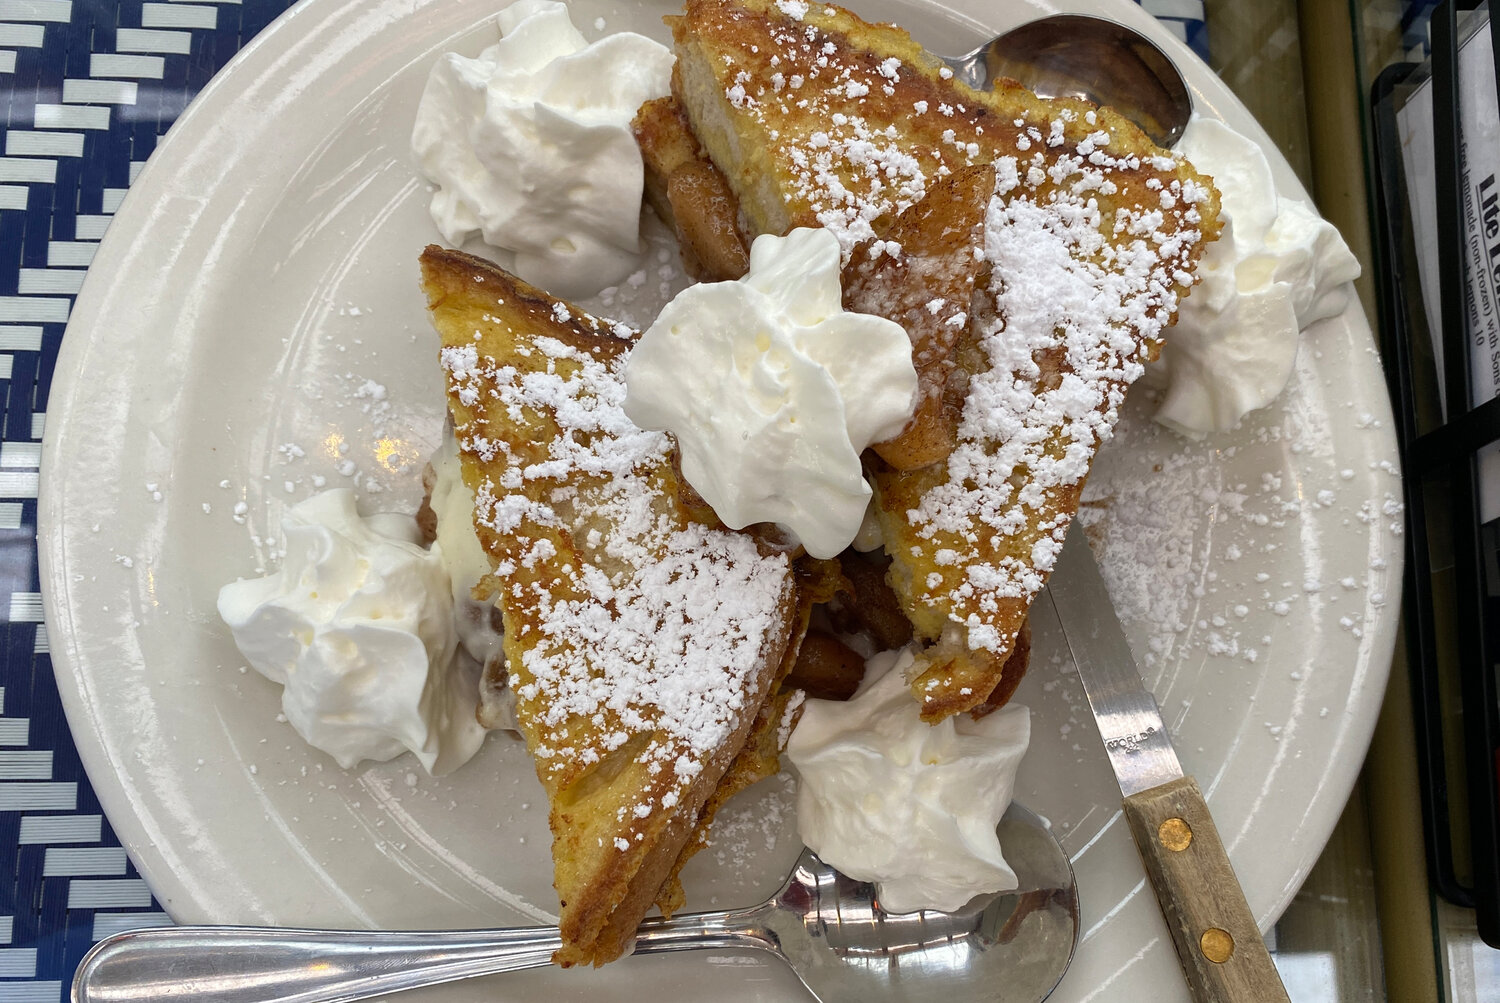 A French toast option from Jiggers South